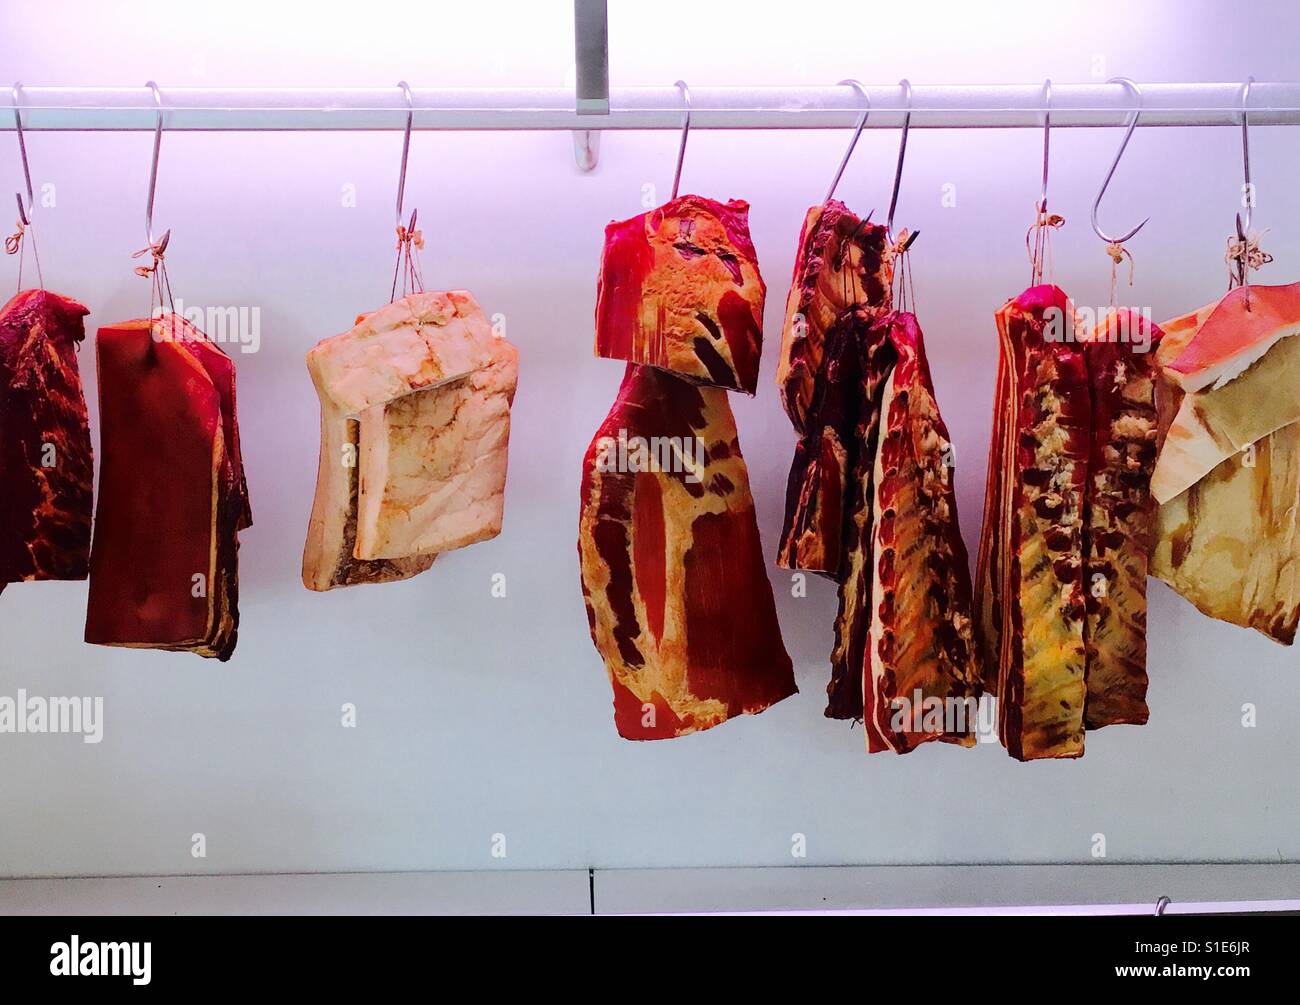 Dry aged meat hanging from hooks at a butcher Stock Photo